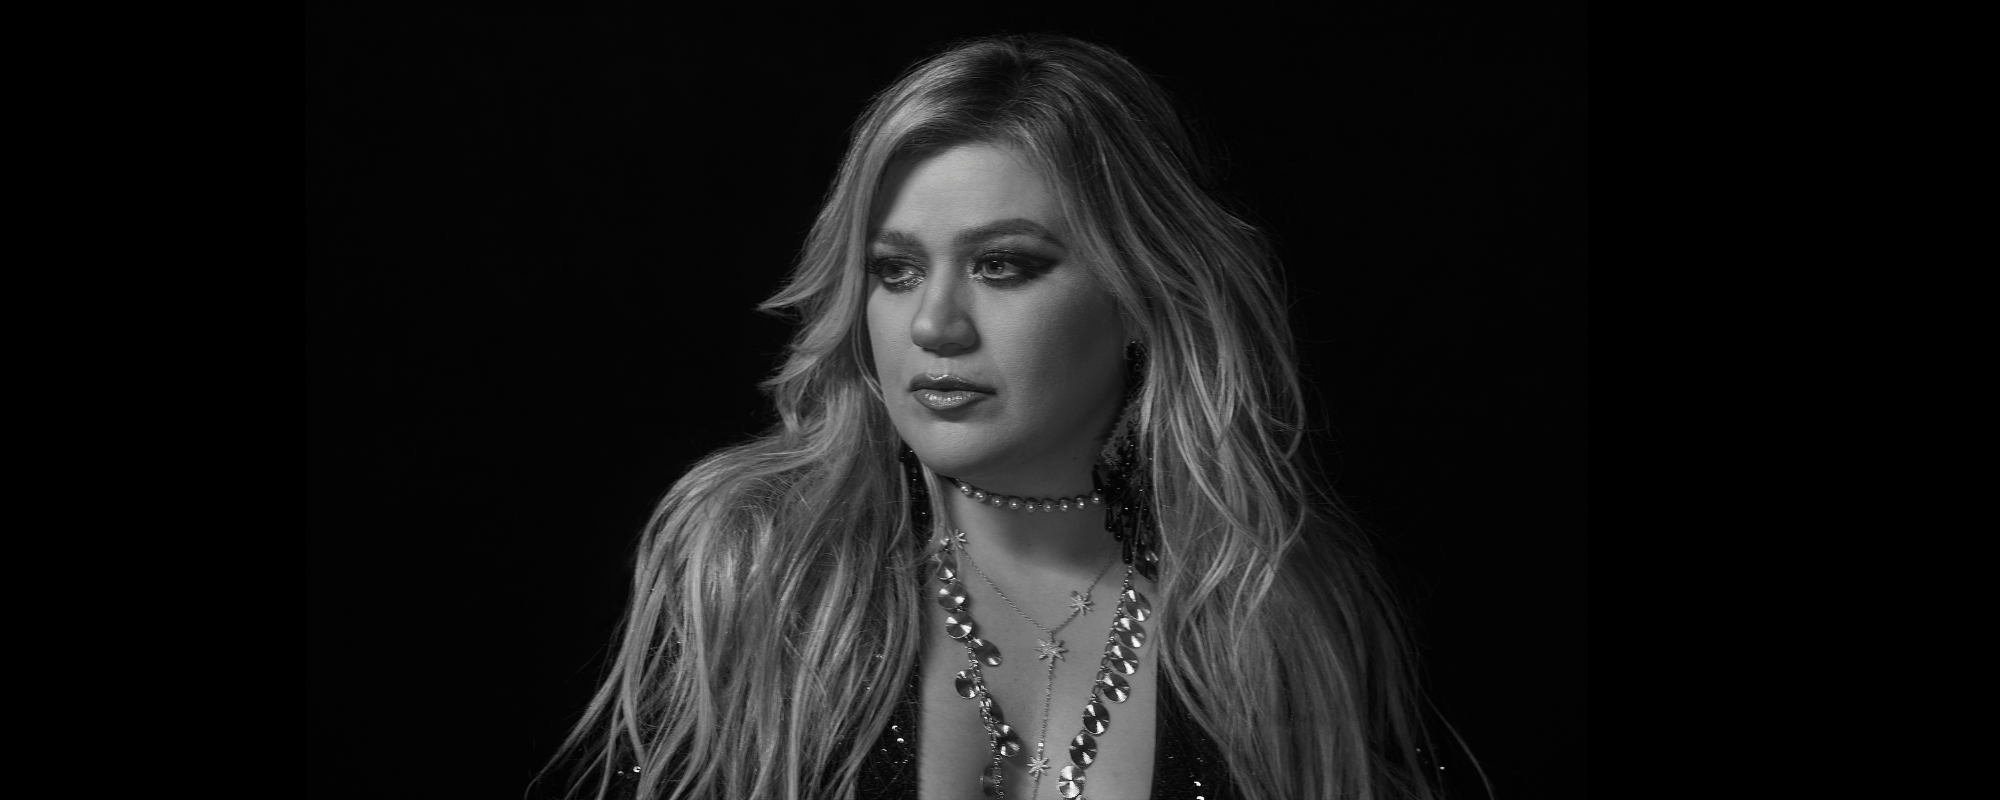 Kelly Clarkson Delivers Stunning Stripped-Down Version of “Mine”